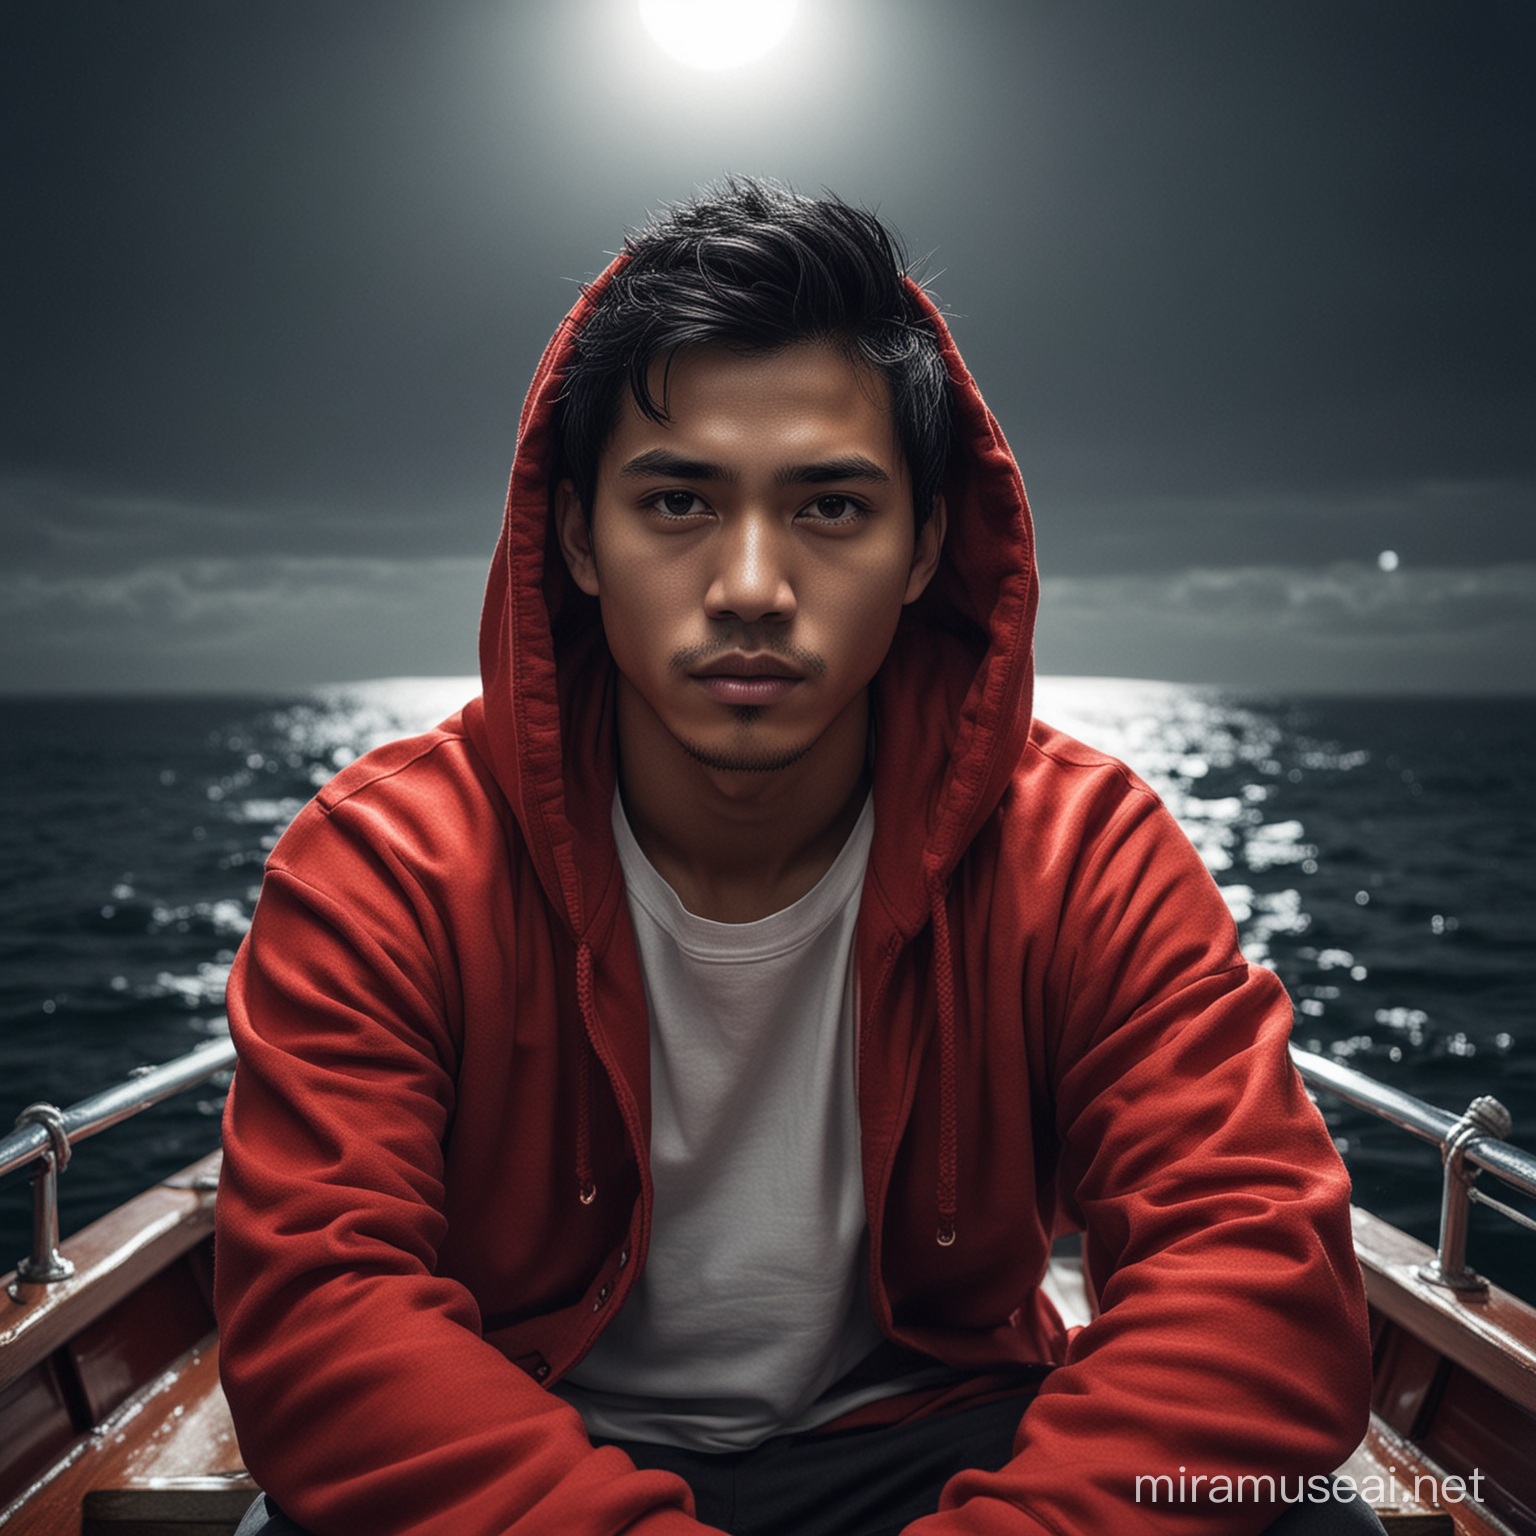 Indonesian Man in Red Hoodie Contemplating on Luxurious Boat at Night with Full Moon